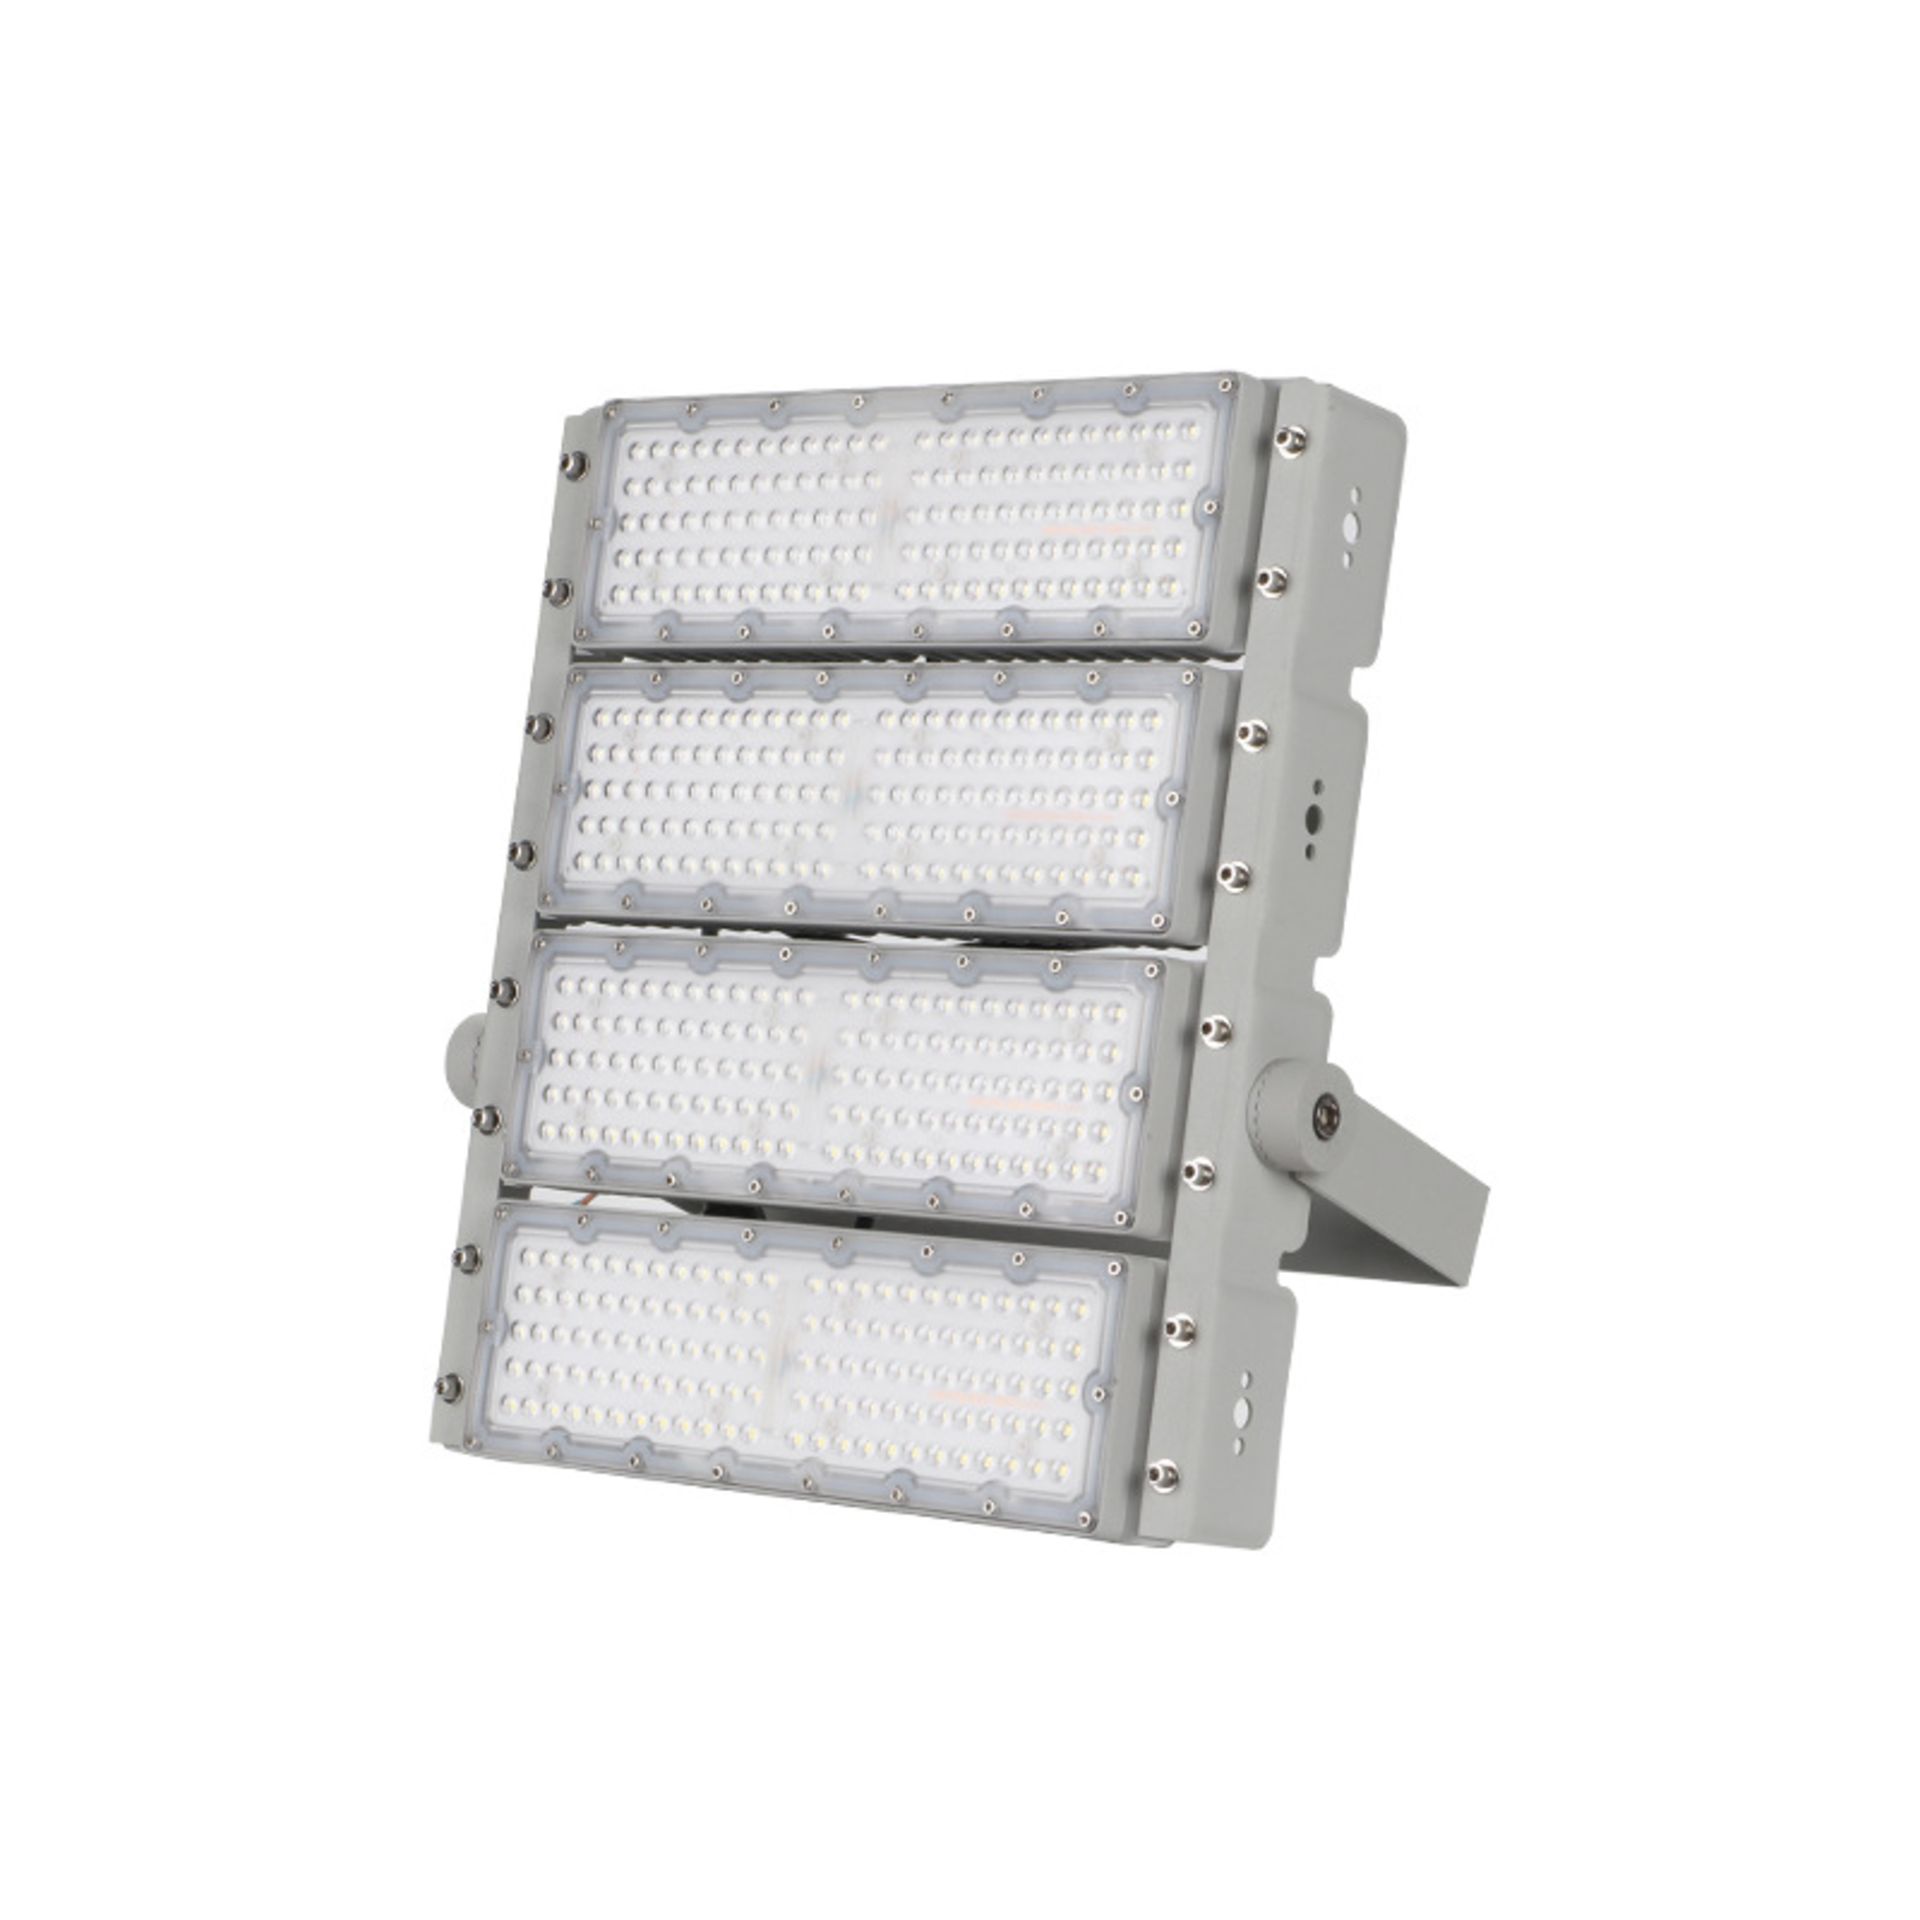 1 x LED400 Watt Flood Light Panel - For Car Parks, Security, Playing fields, Football pitches etc - Image 7 of 8